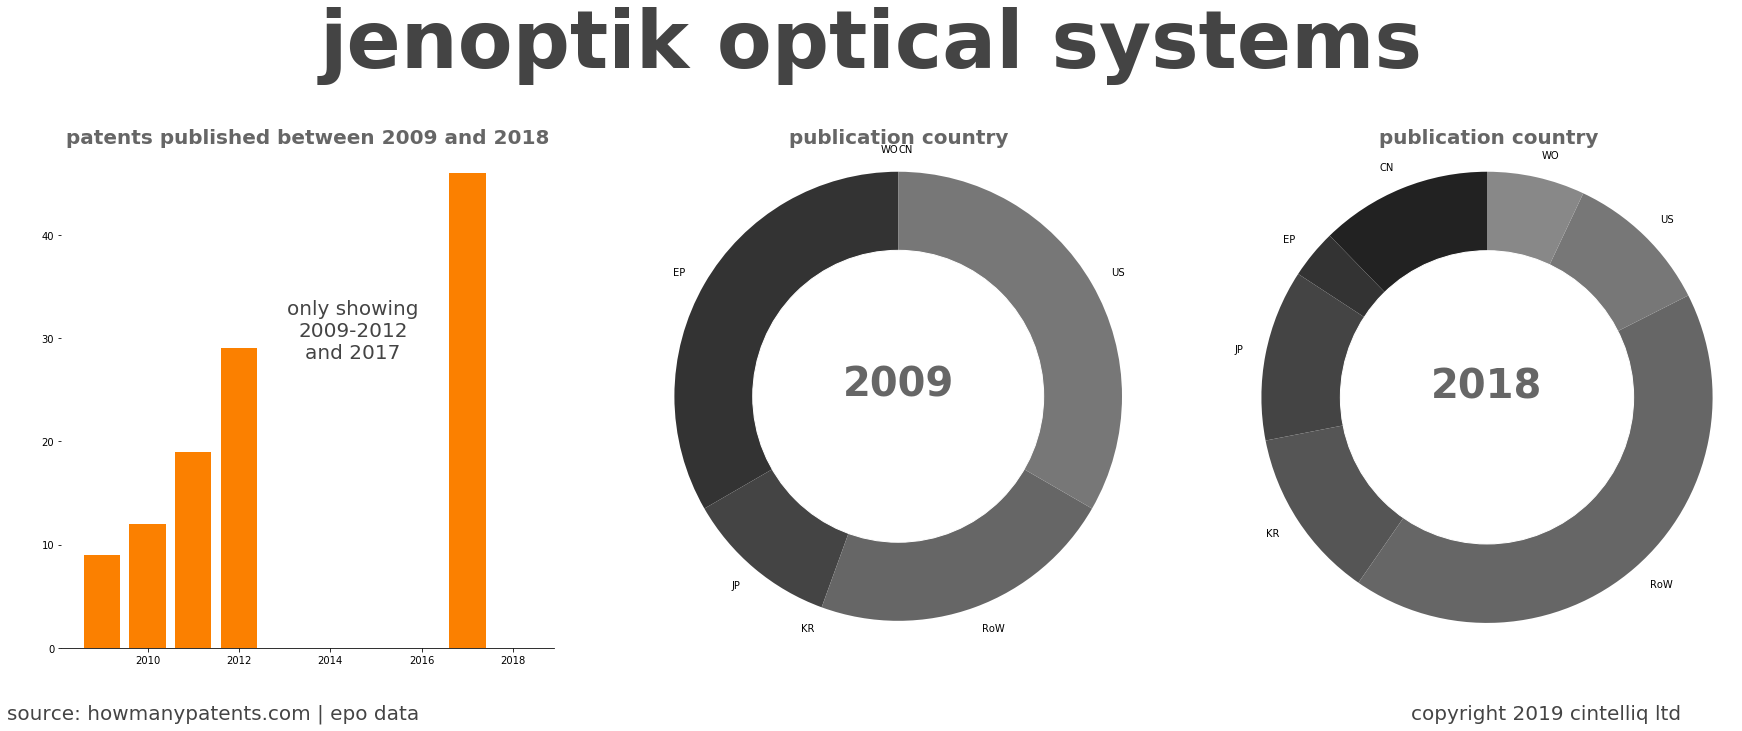 summary of patents for Jenoptik Optical Systems